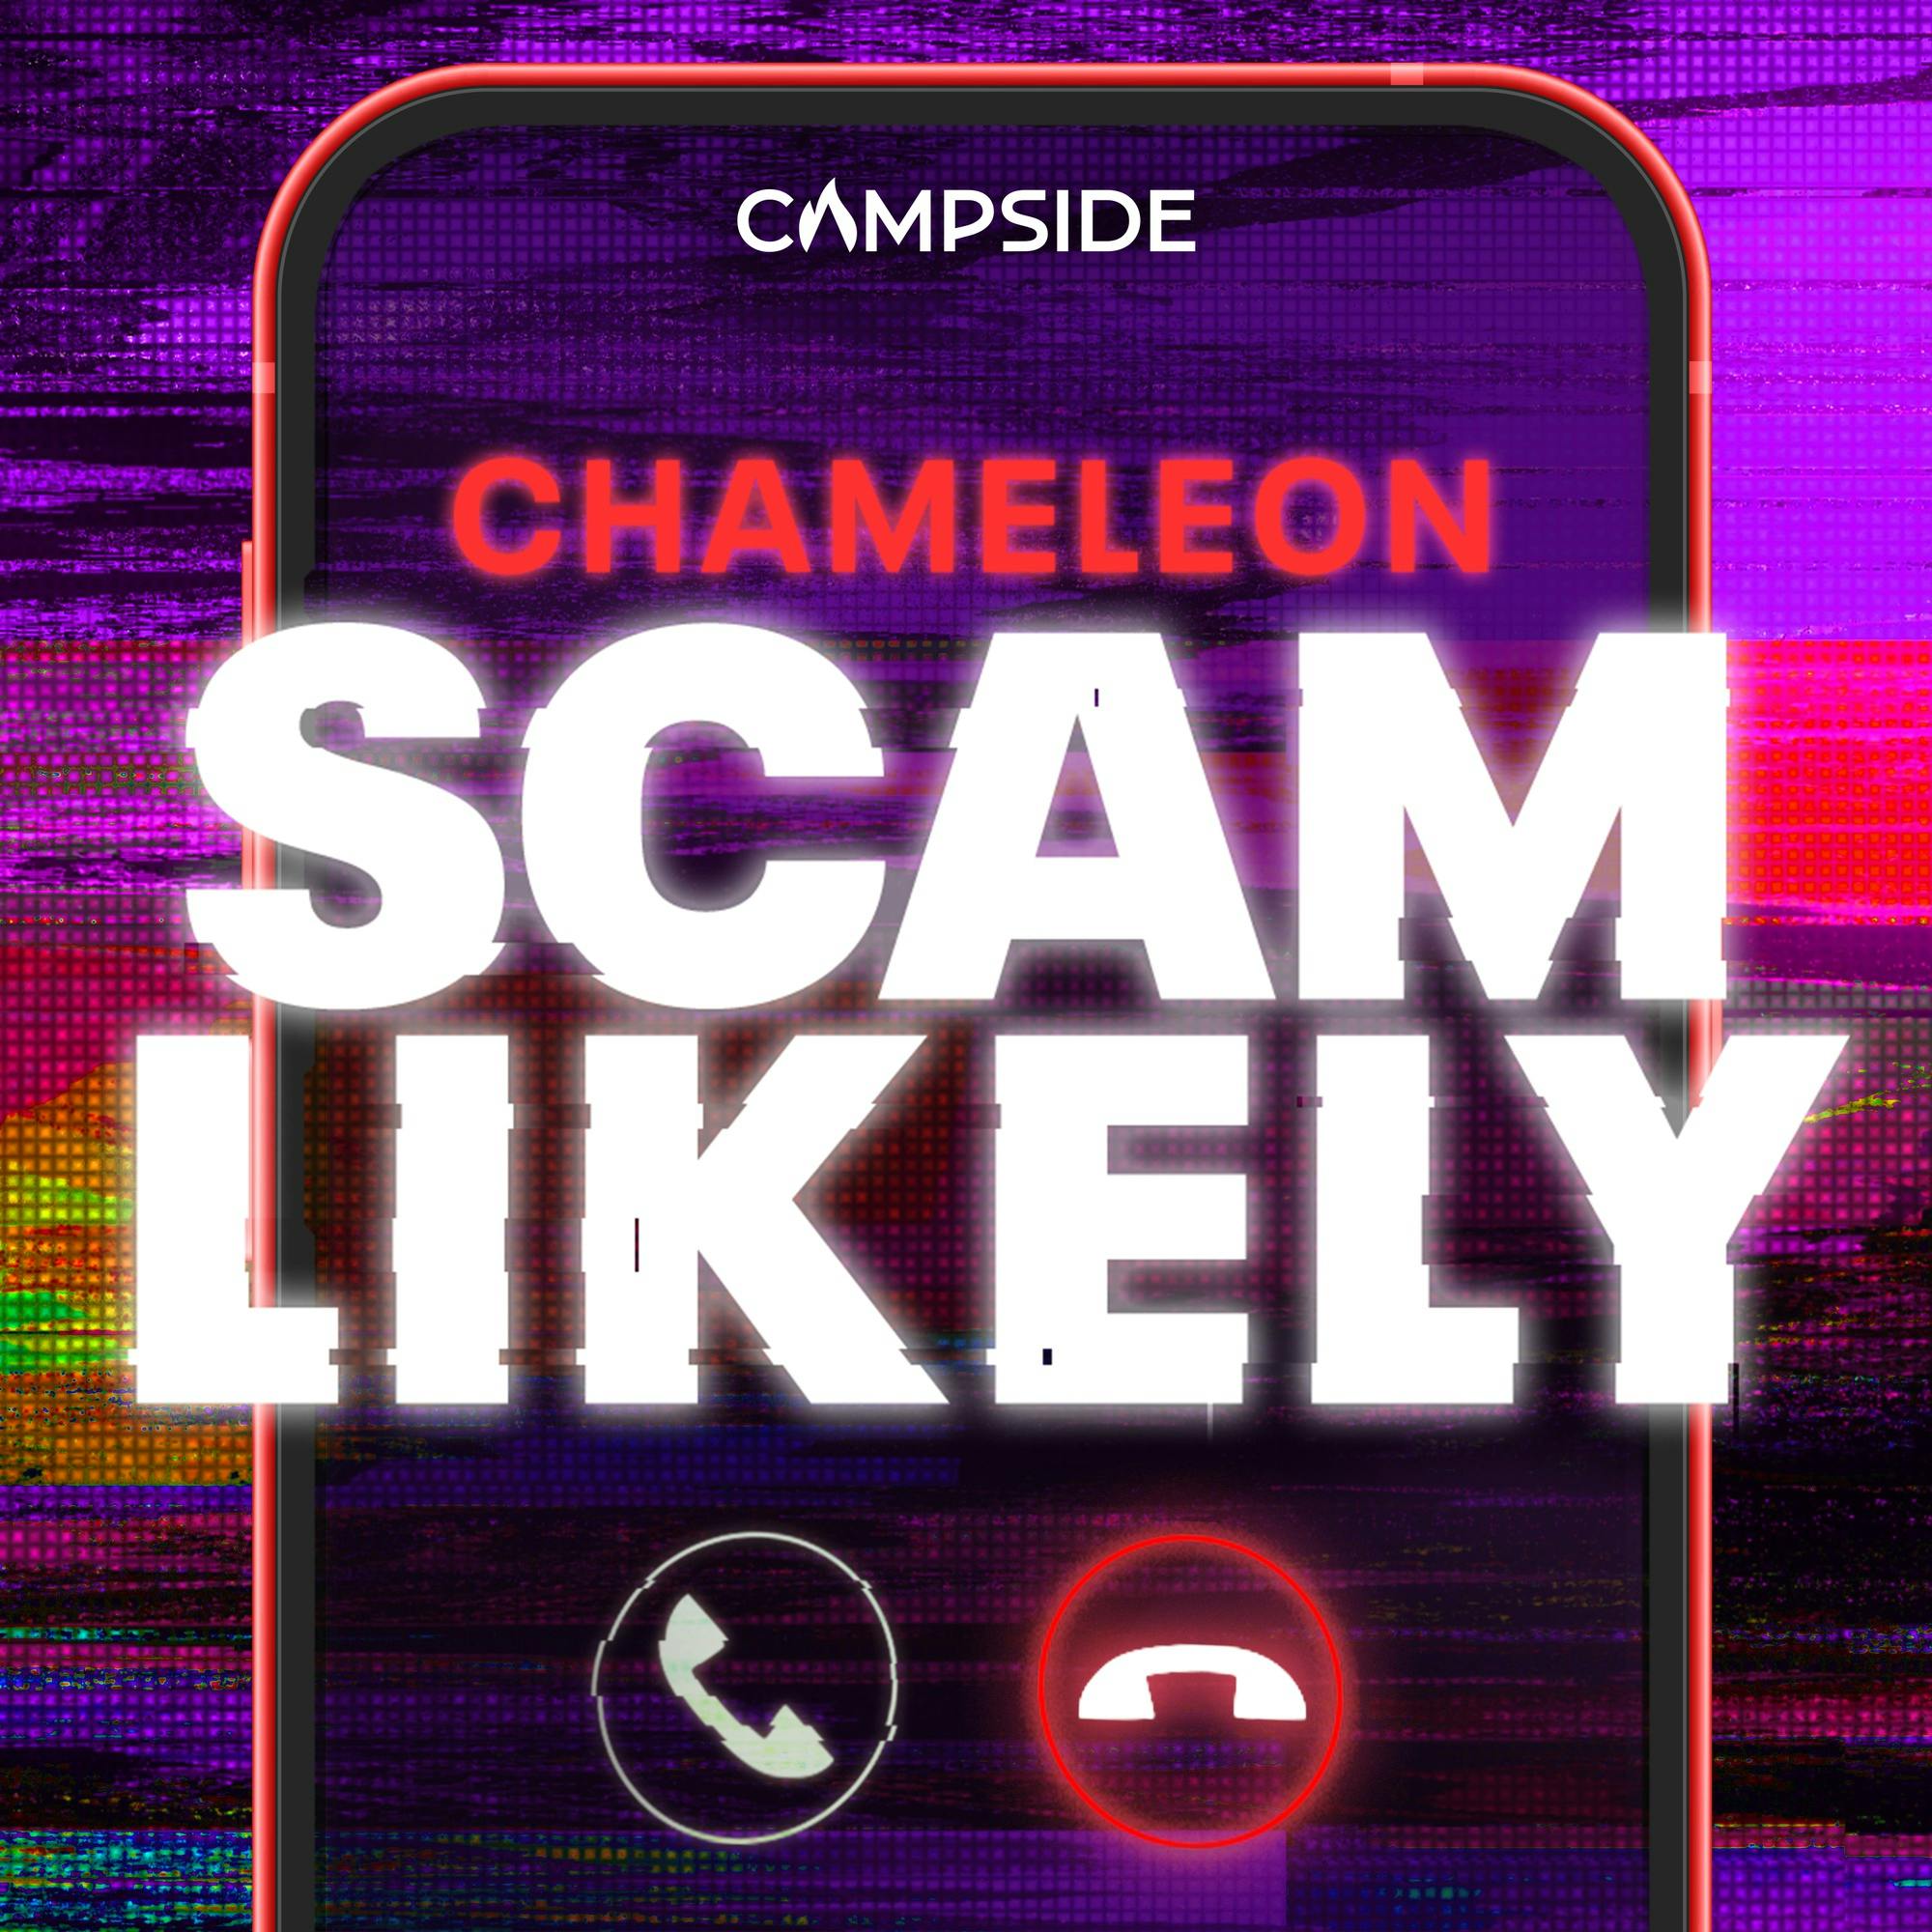 Chameleon: Scam Likely by Campside Media / Sony Music Entertainment